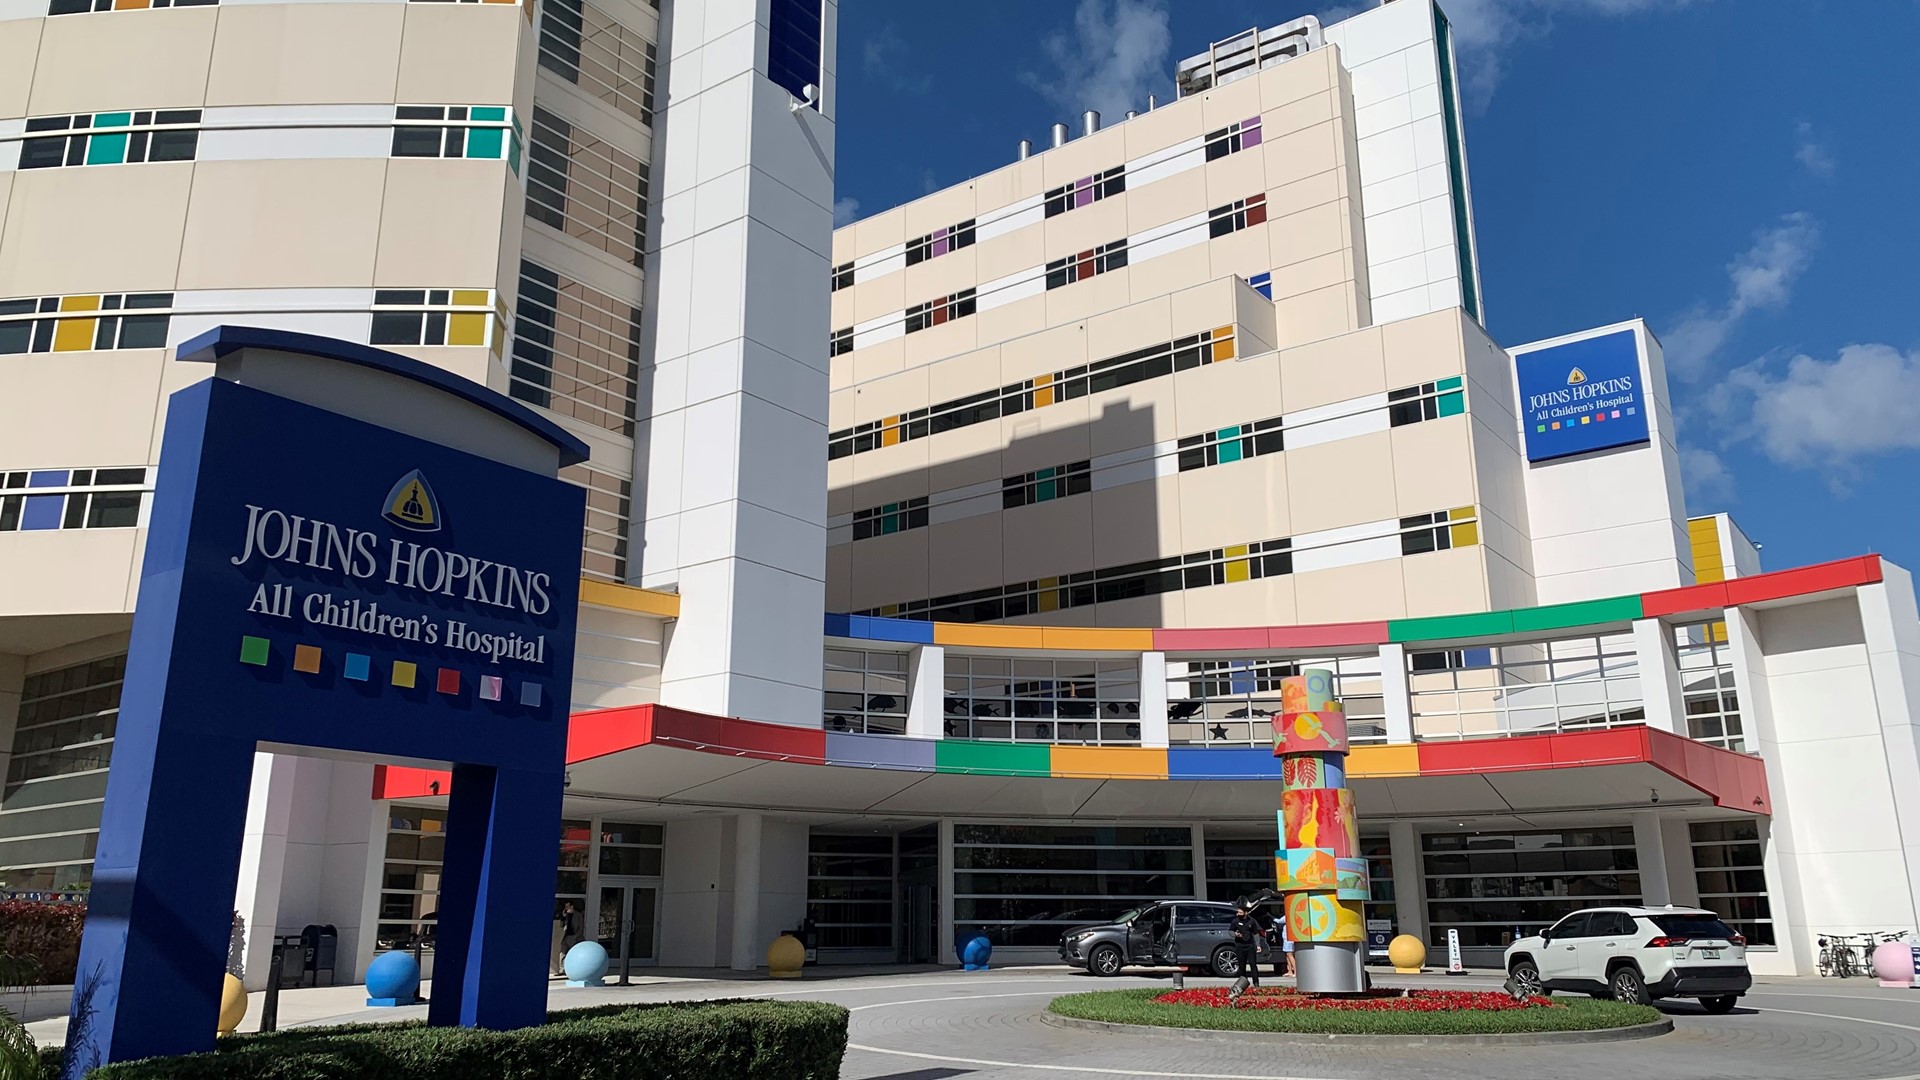 As the omicron COVID-19 variant causes new cases to surge, doctors in the Tampa Bay area are expressing concern over the growing number of local pediatric cases.